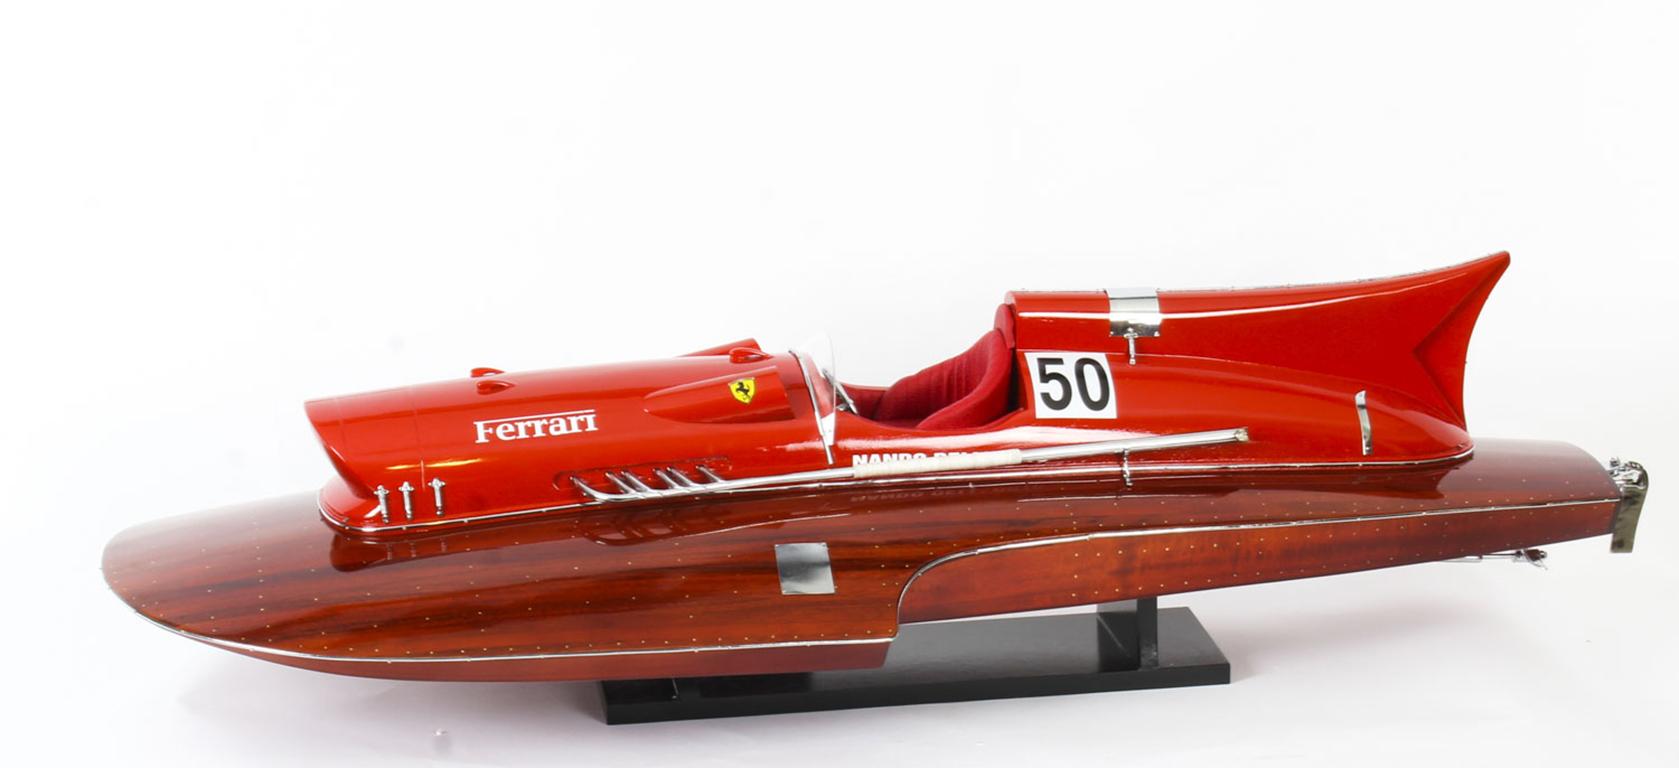 This is a superb vintage model of a Ferrari Hydroplane 1954, late 20th century in date. Measures: 37